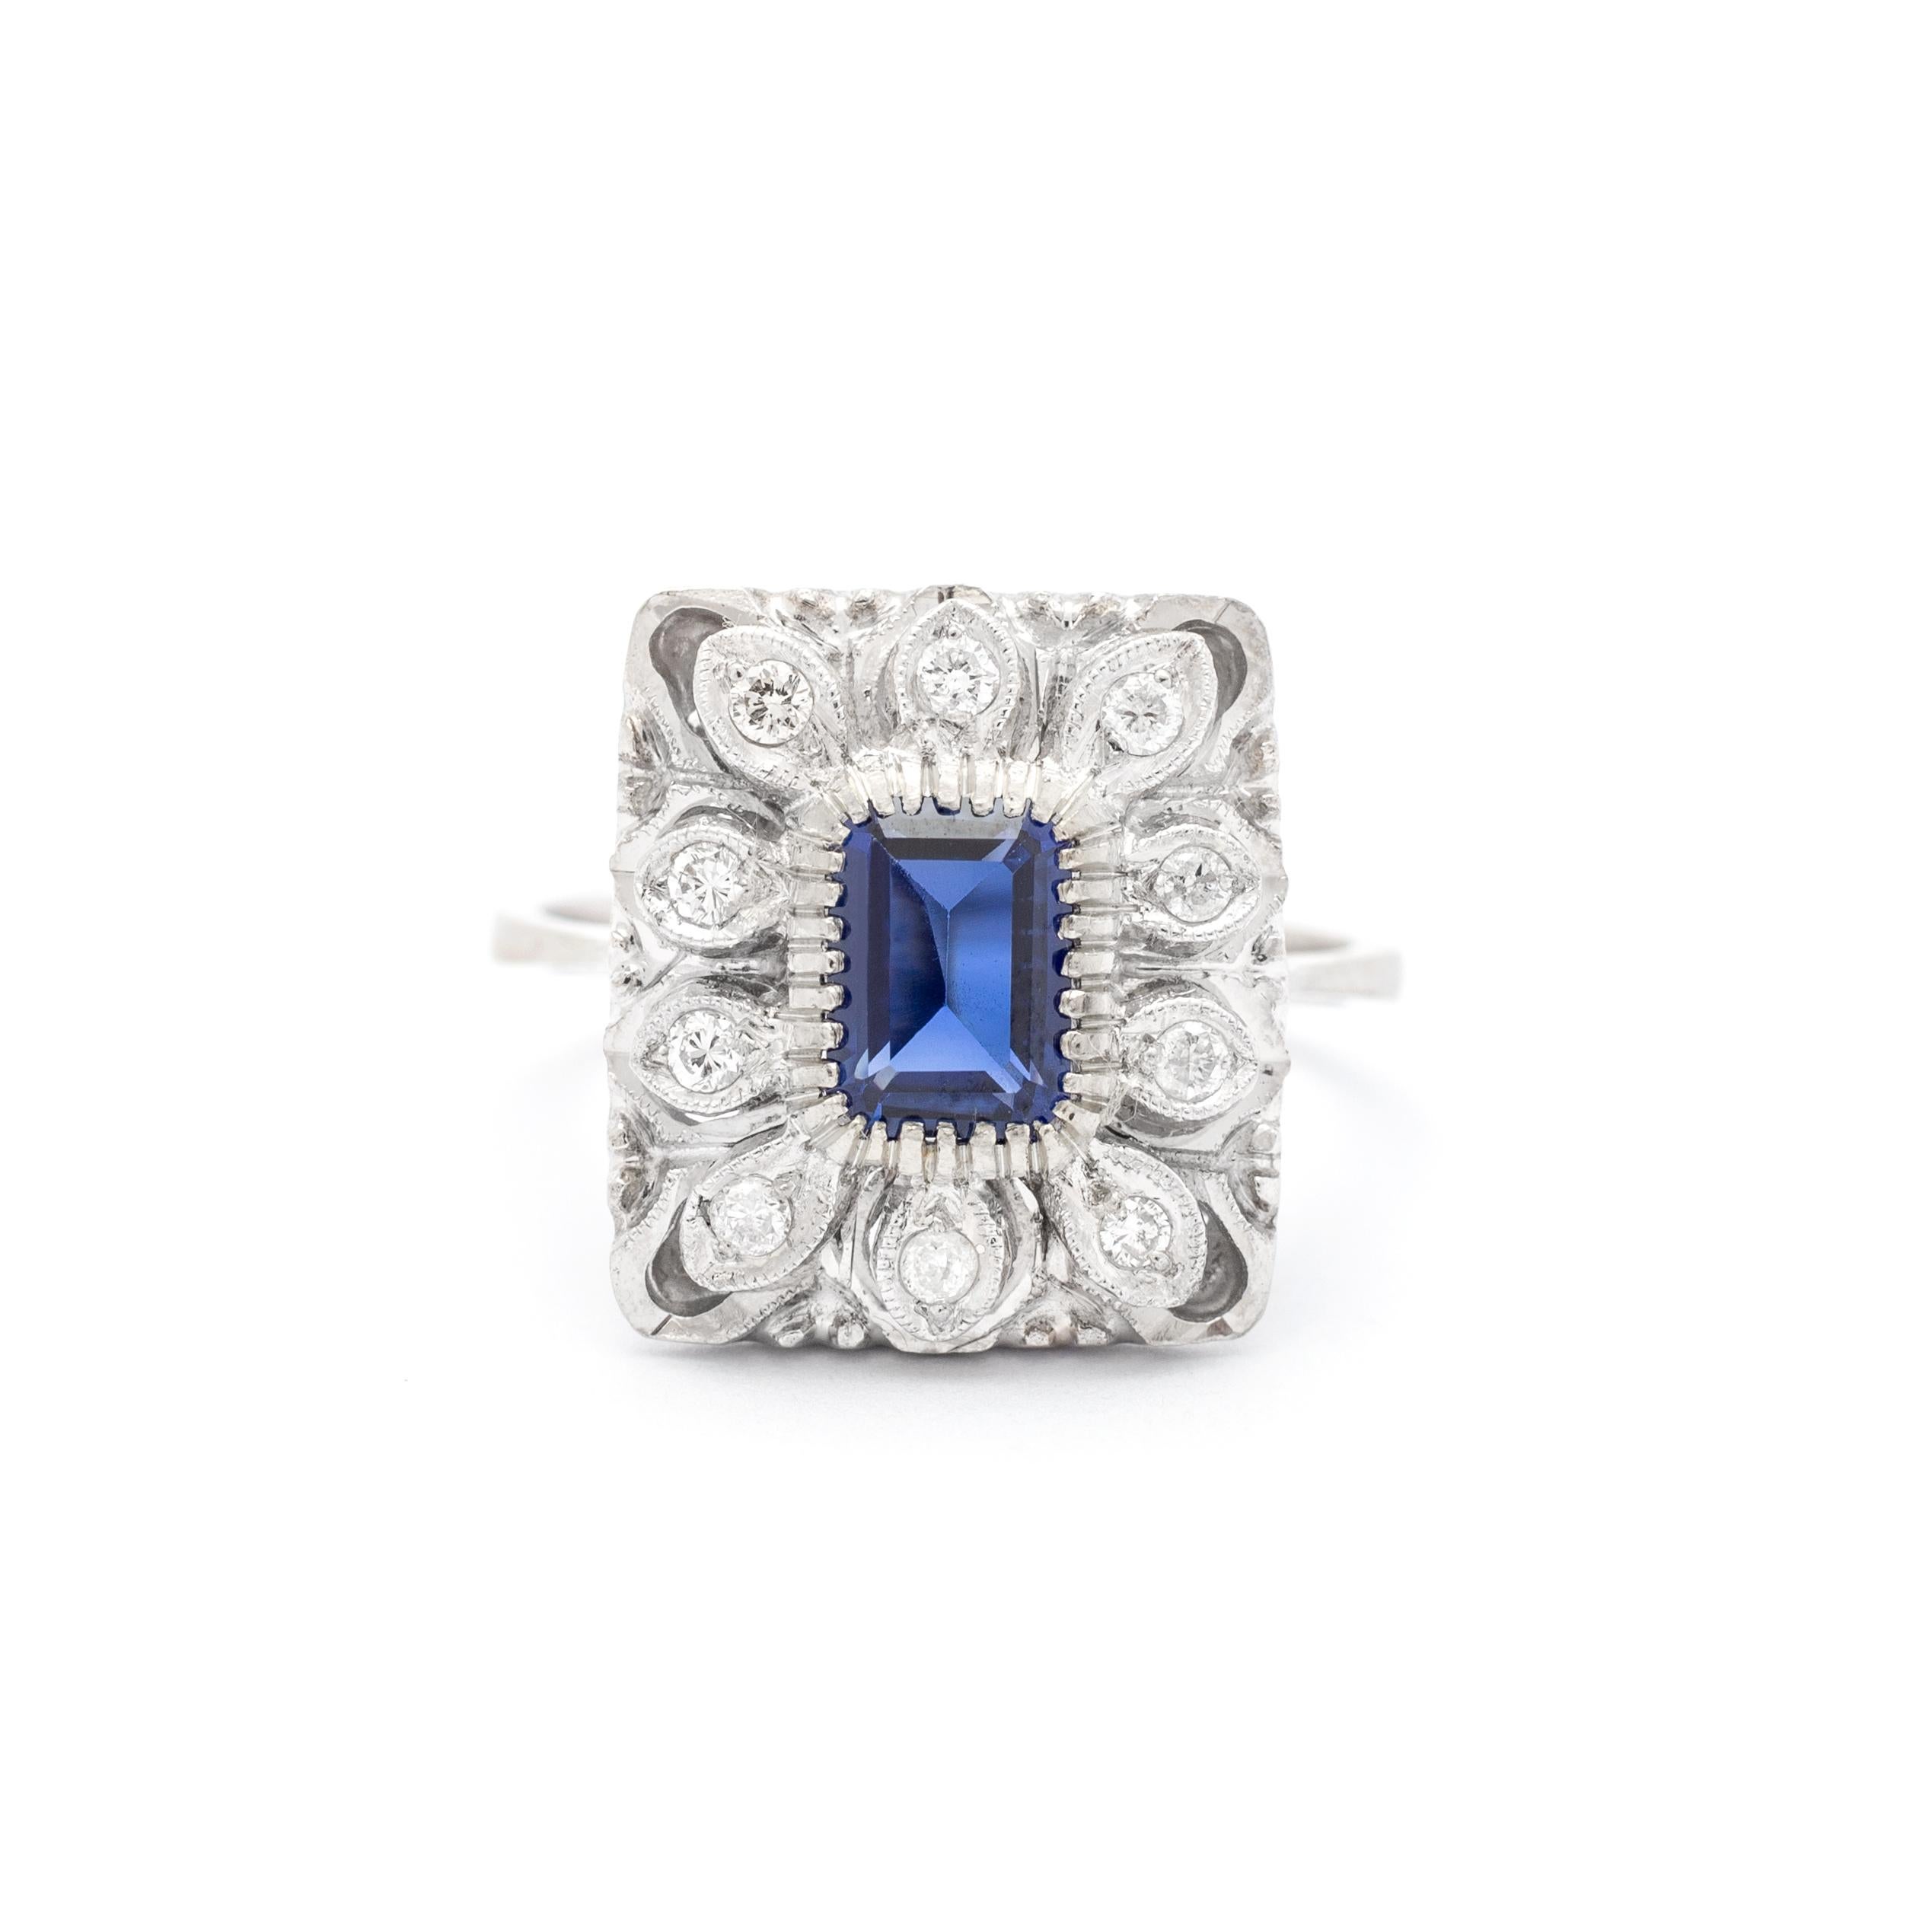 Anglo-Indian Sapphire Diamond Ring